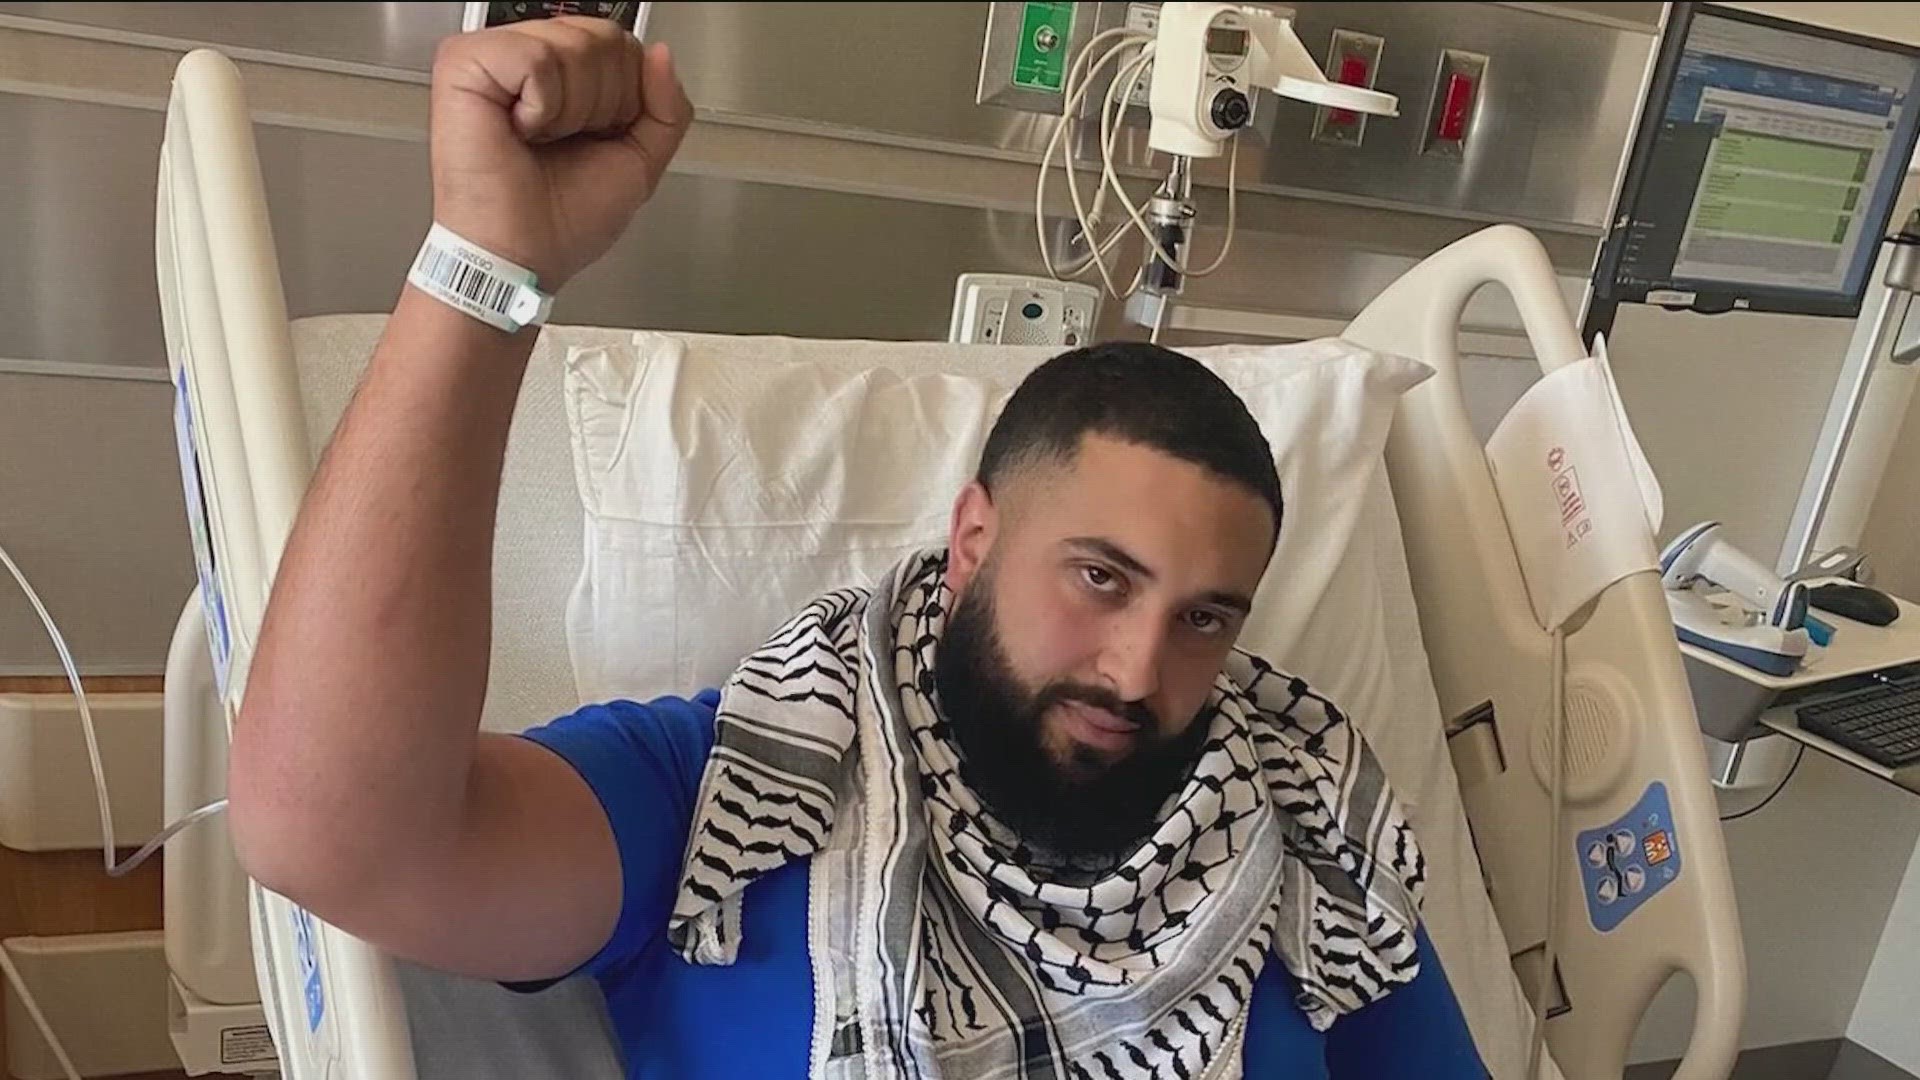 Zacharia Doar was attacked after attending a pro-Palestine rally at the State Capitol last Sunday, and told his story to KVUE's sister station WFAA.